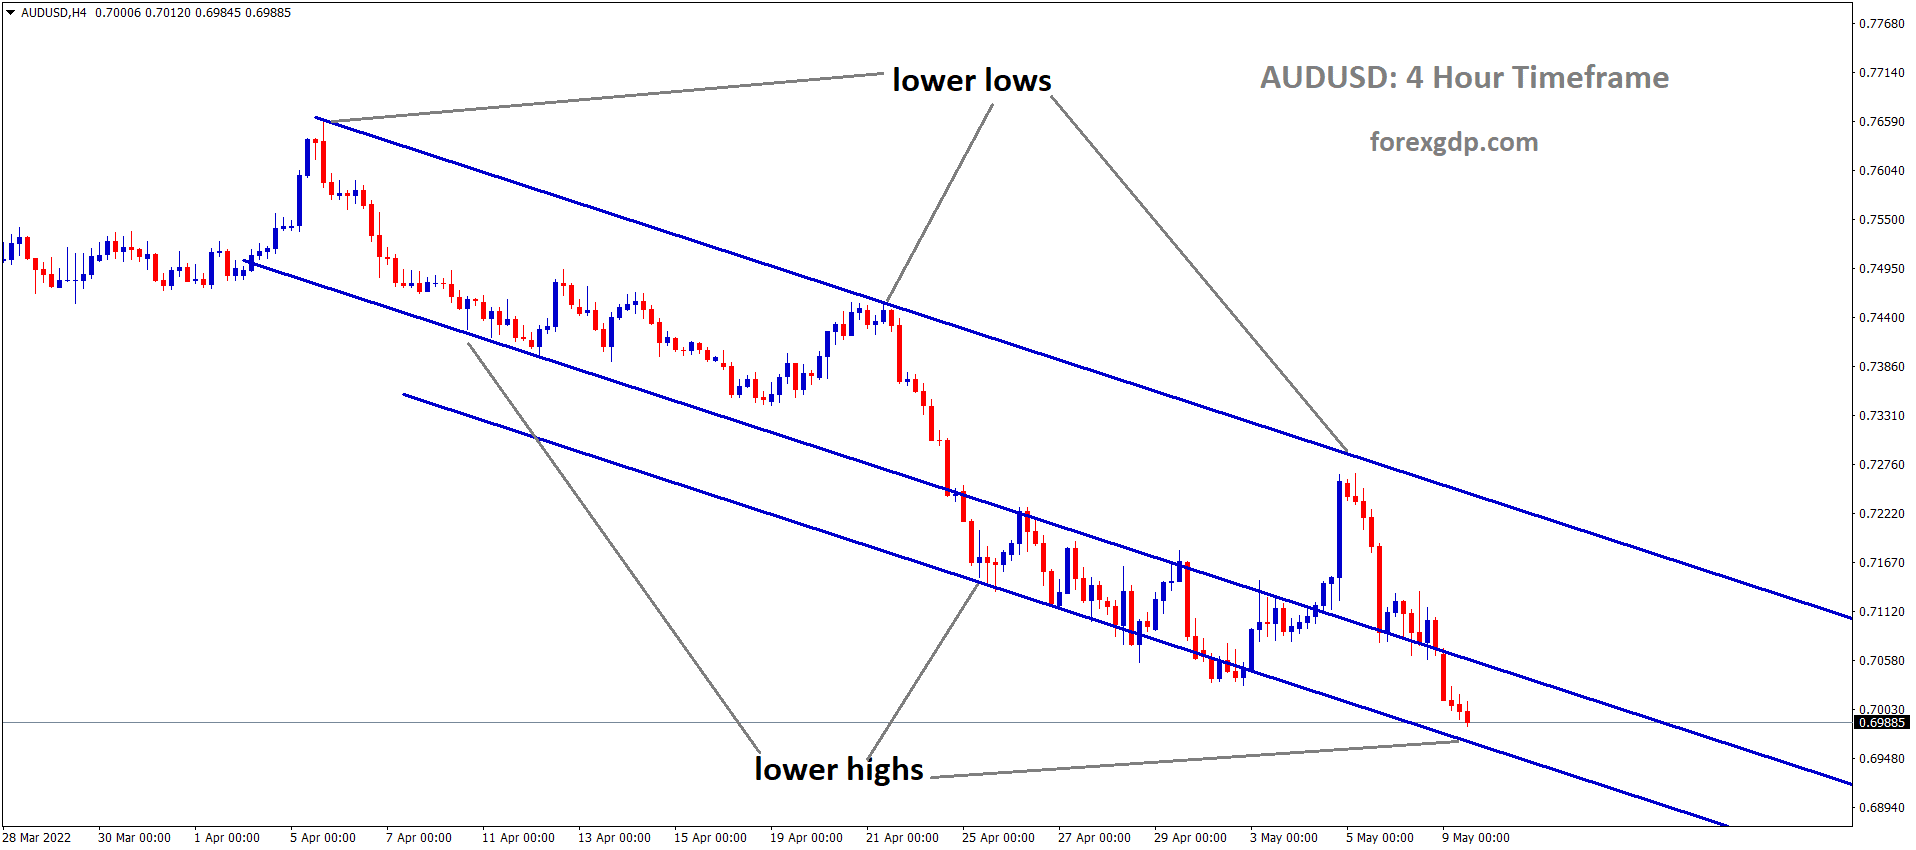 AUDUSD H4 Time Frame Analysis Market is moving in the Descending channel and the Market has reached the Lower low area of the Channel